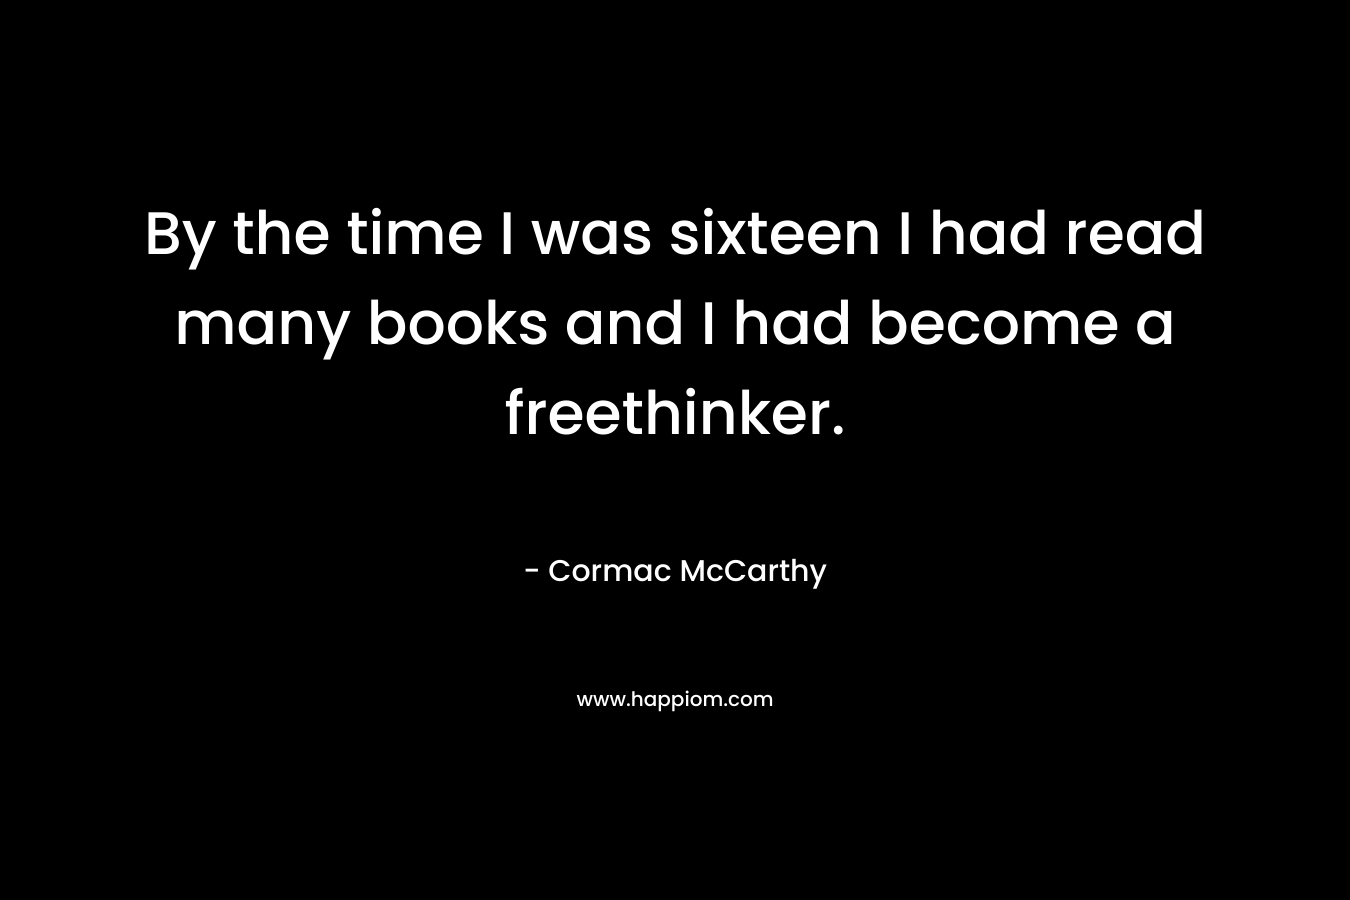 By the time I was sixteen I had read many books and I had become a freethinker.